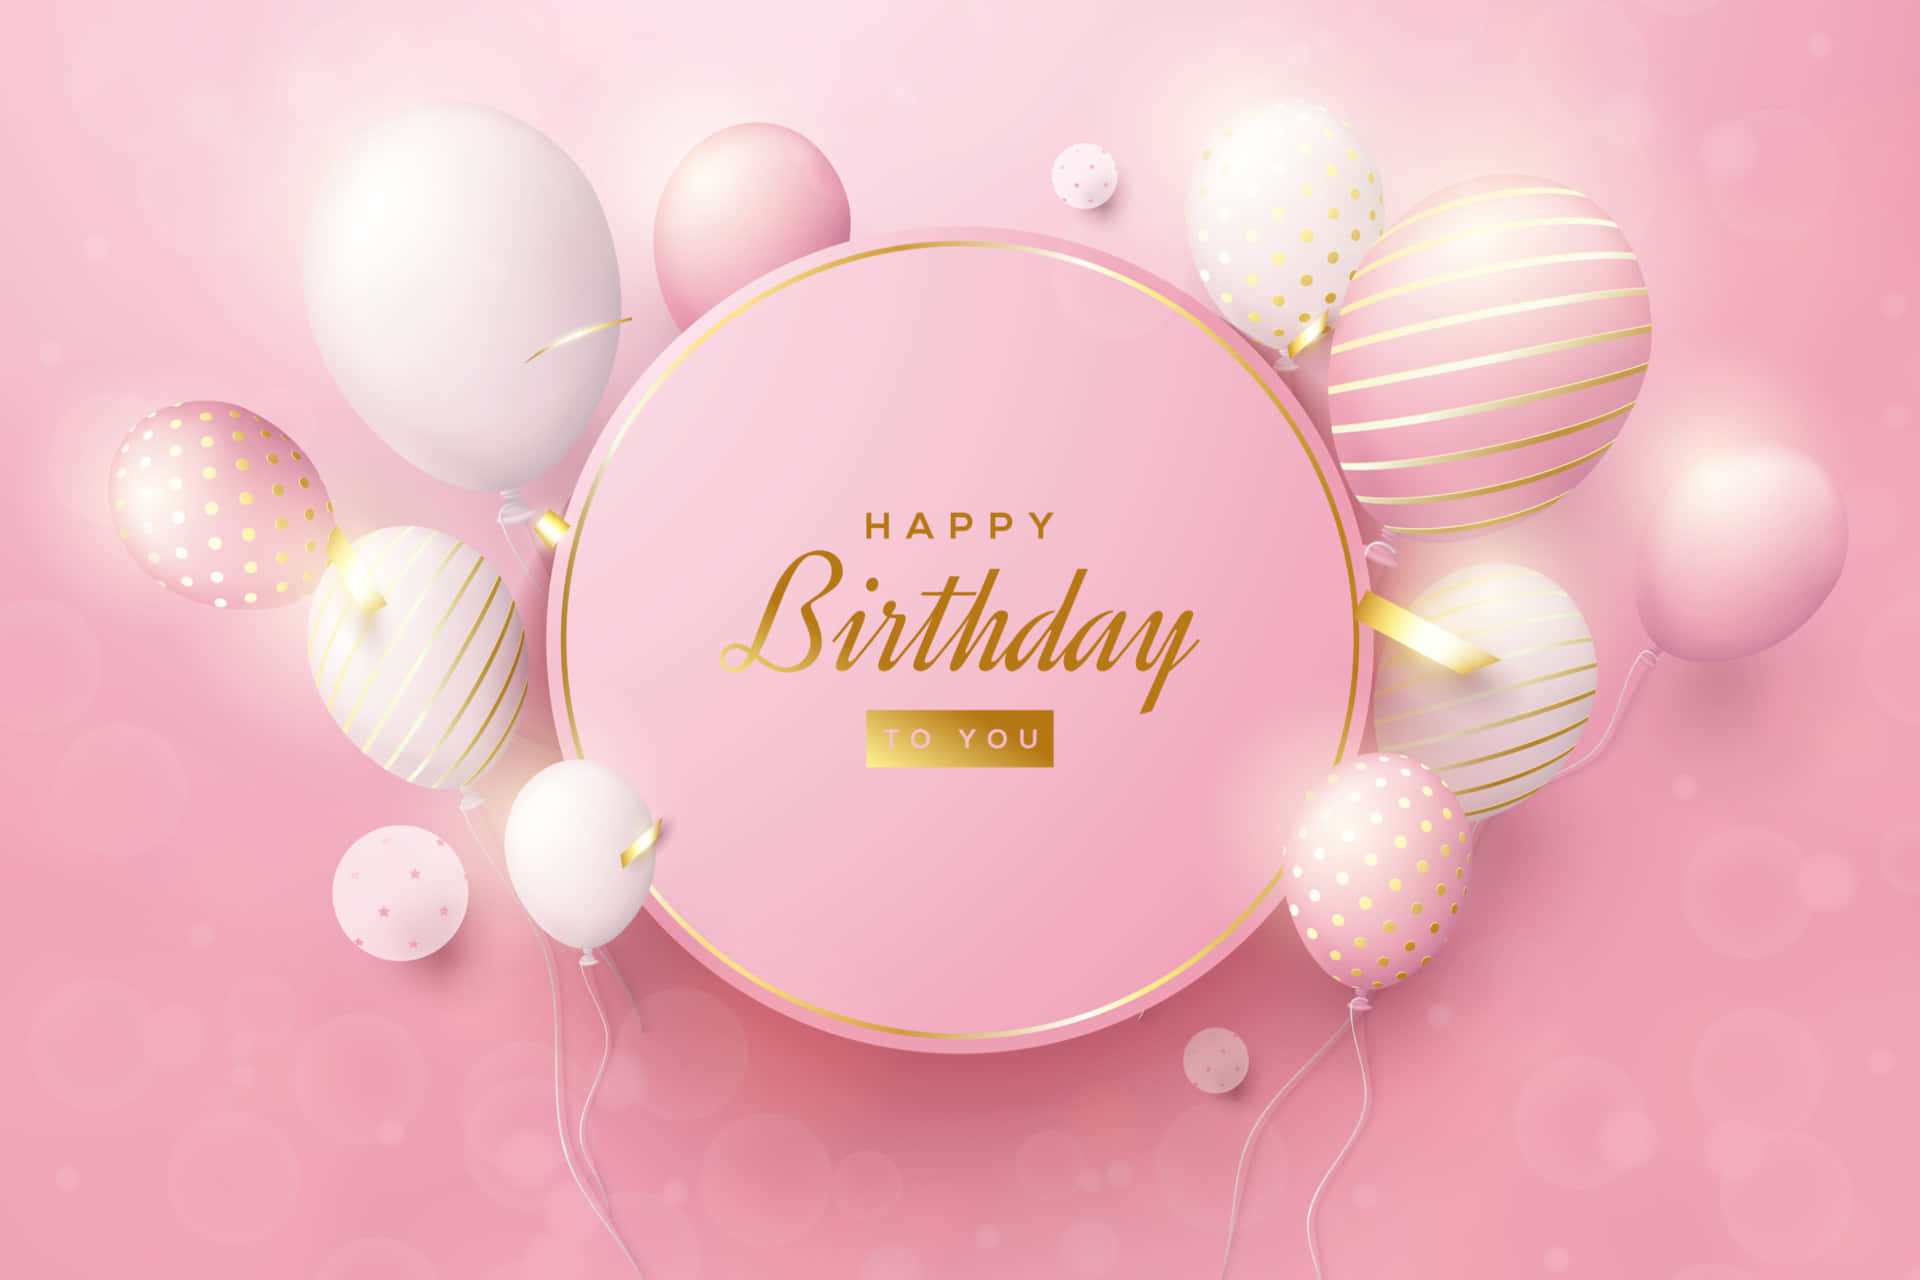 Happy Birthday Balloons On Pink Background Wallpaper